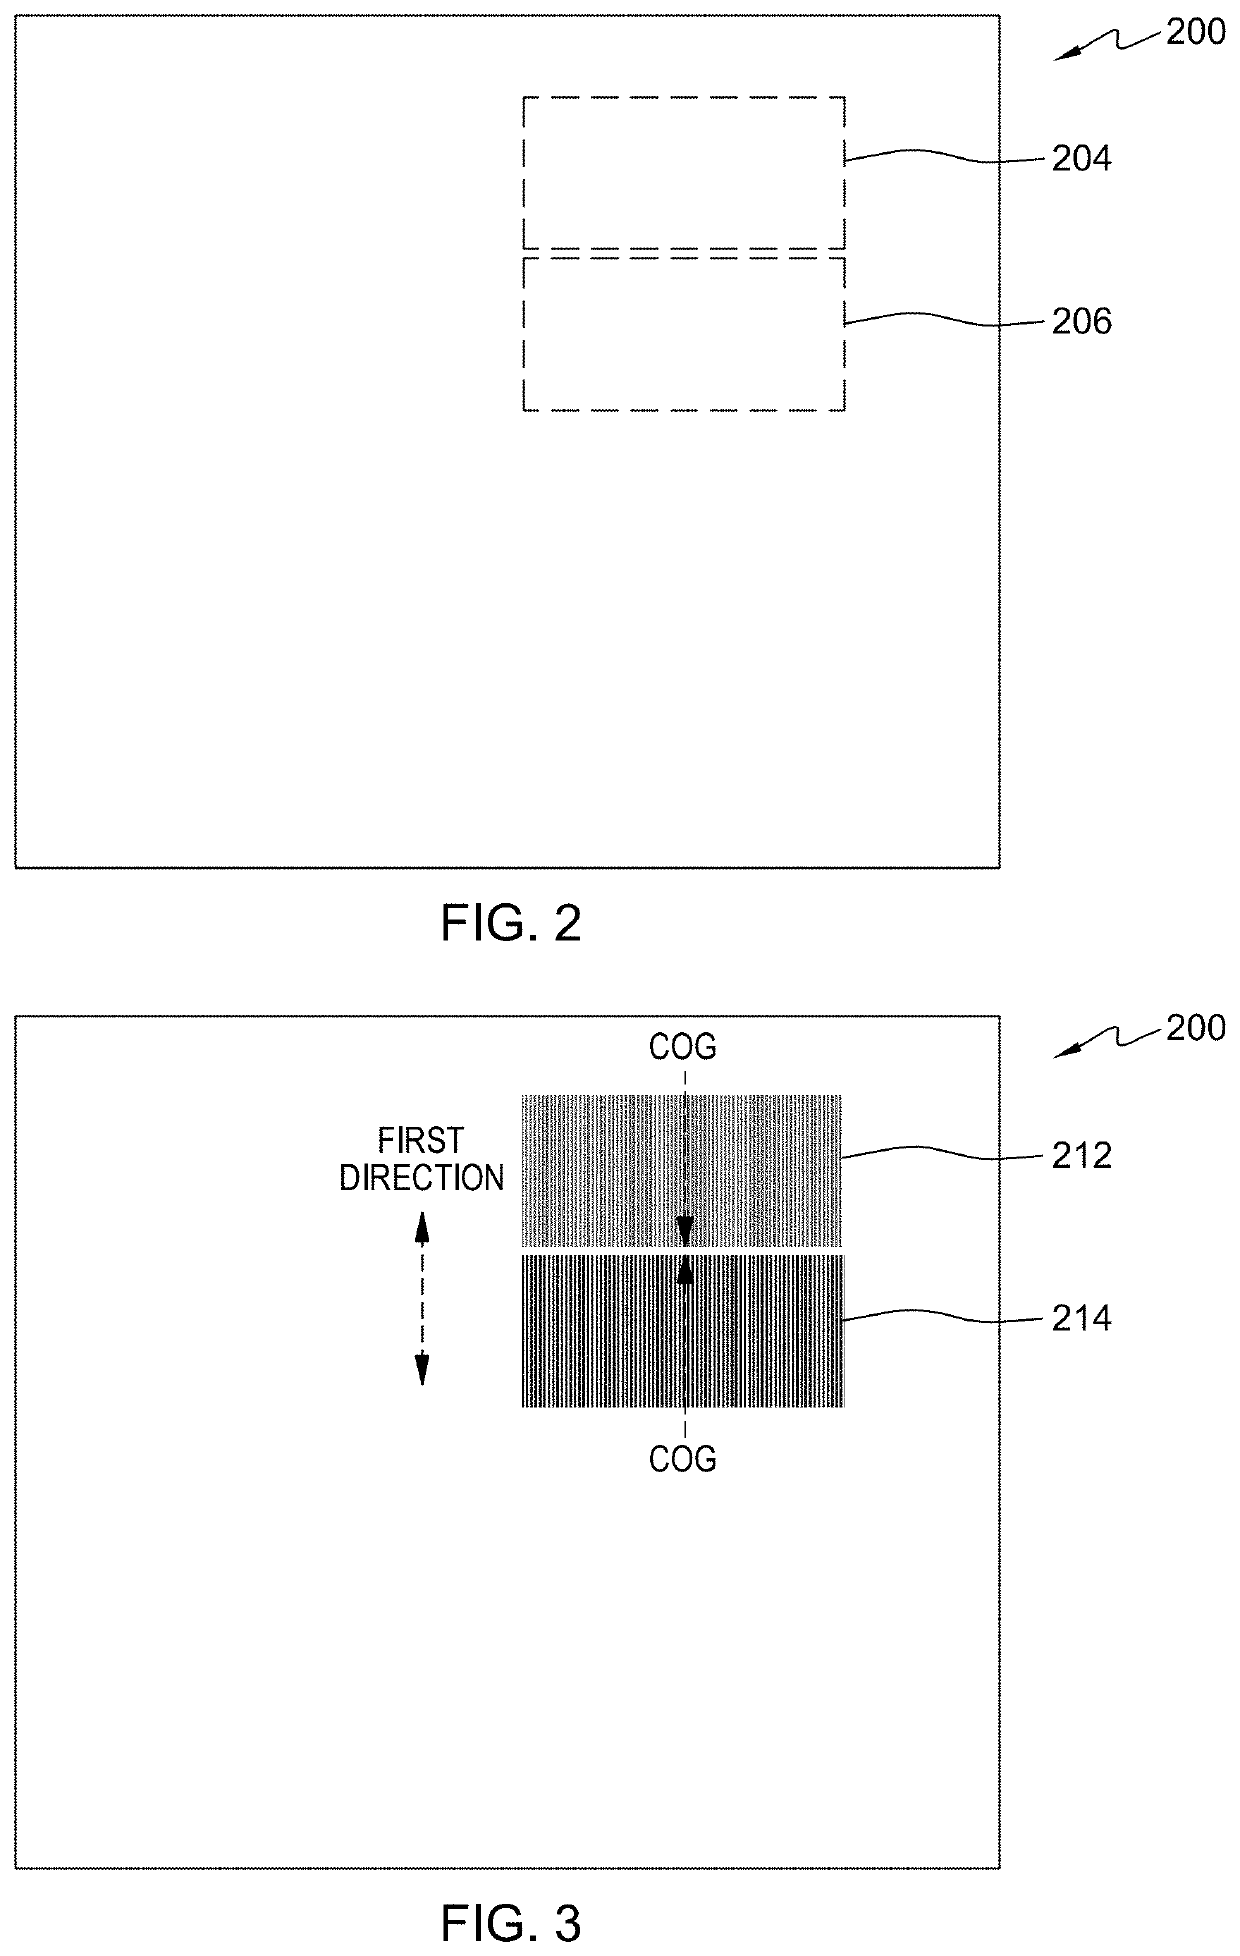 Self-referencing and self-calibrating interference pattern overlay measurement